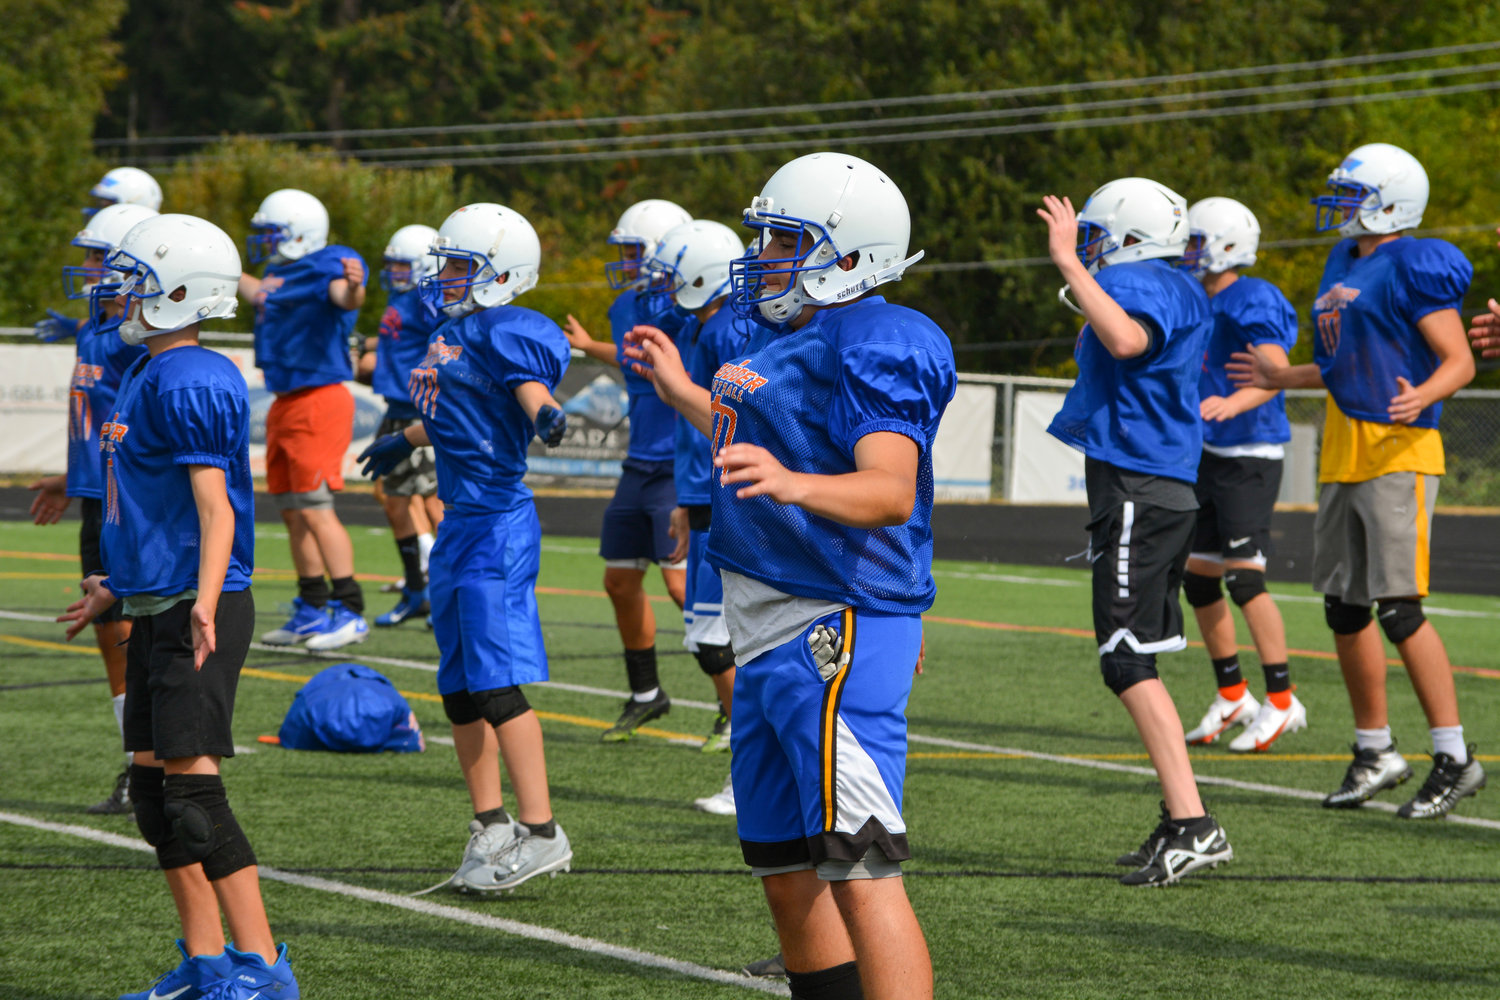 Ridgefield head coach Scott Rice said 79 athletes joined the Spudders this season, compared to the 45 players from two years ago.